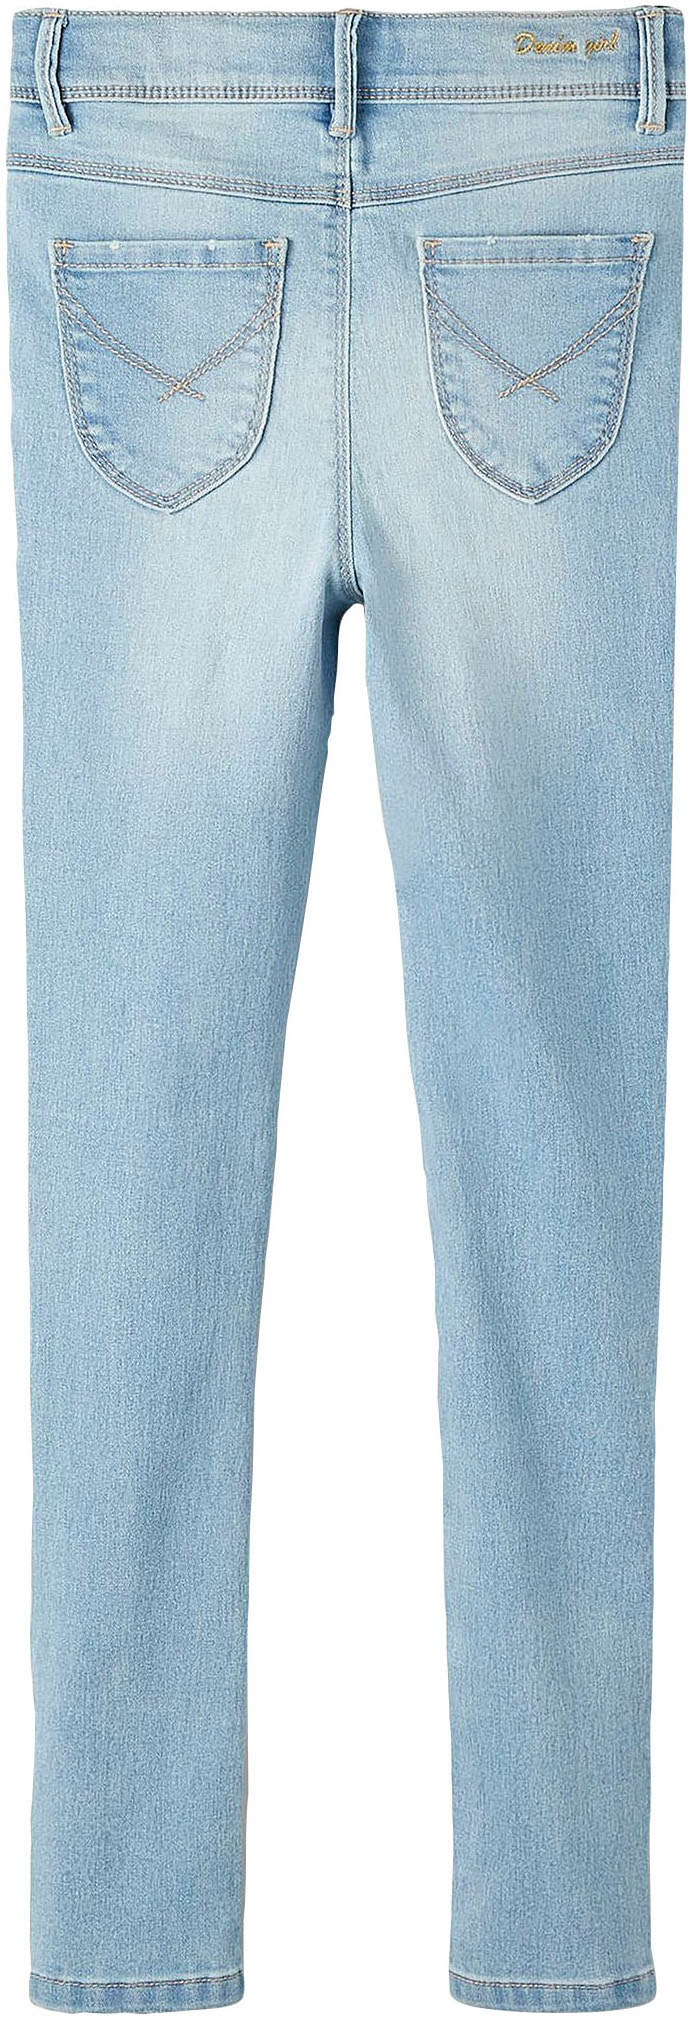 HW PANT OTTO Skinny-fit-Jeans »NKFPOLLY bei Name DNMTHRIS PB« It